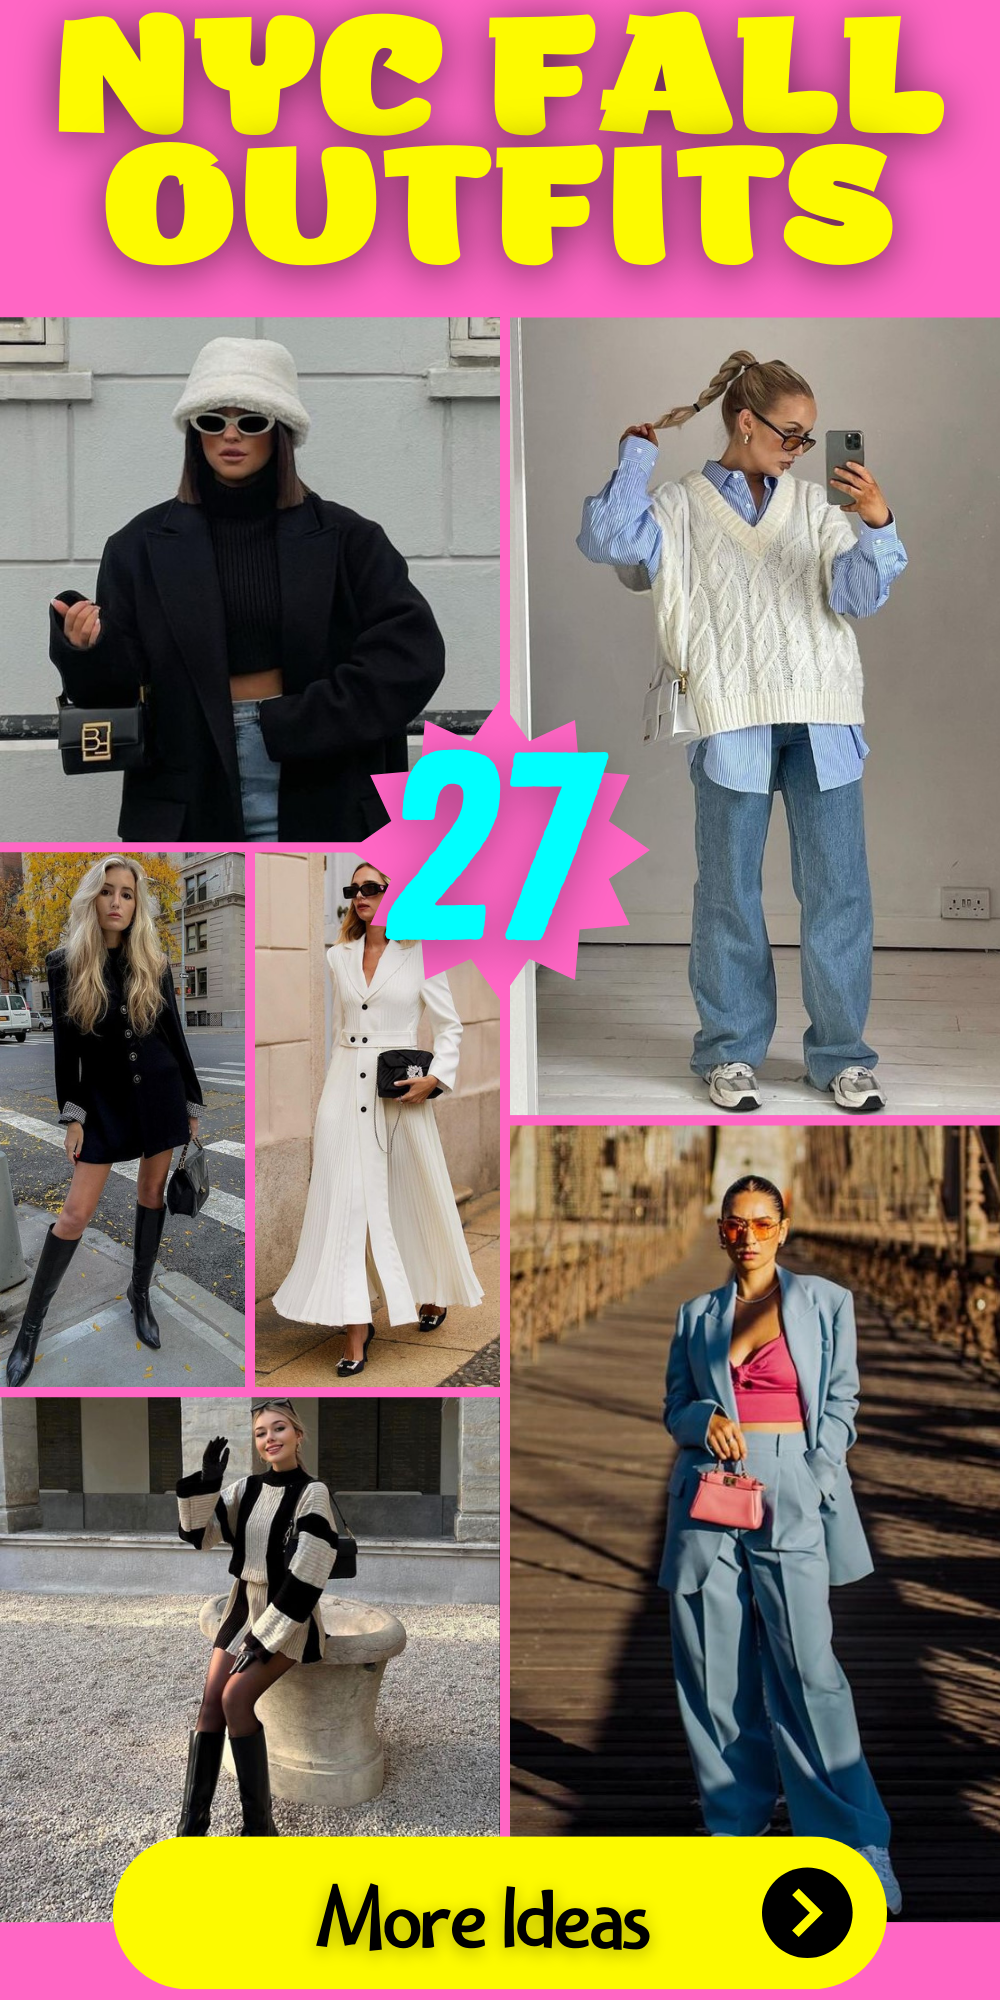 NYC Fall Outfits: 27 Trendy Ideas to Elevate Your Autumn Style